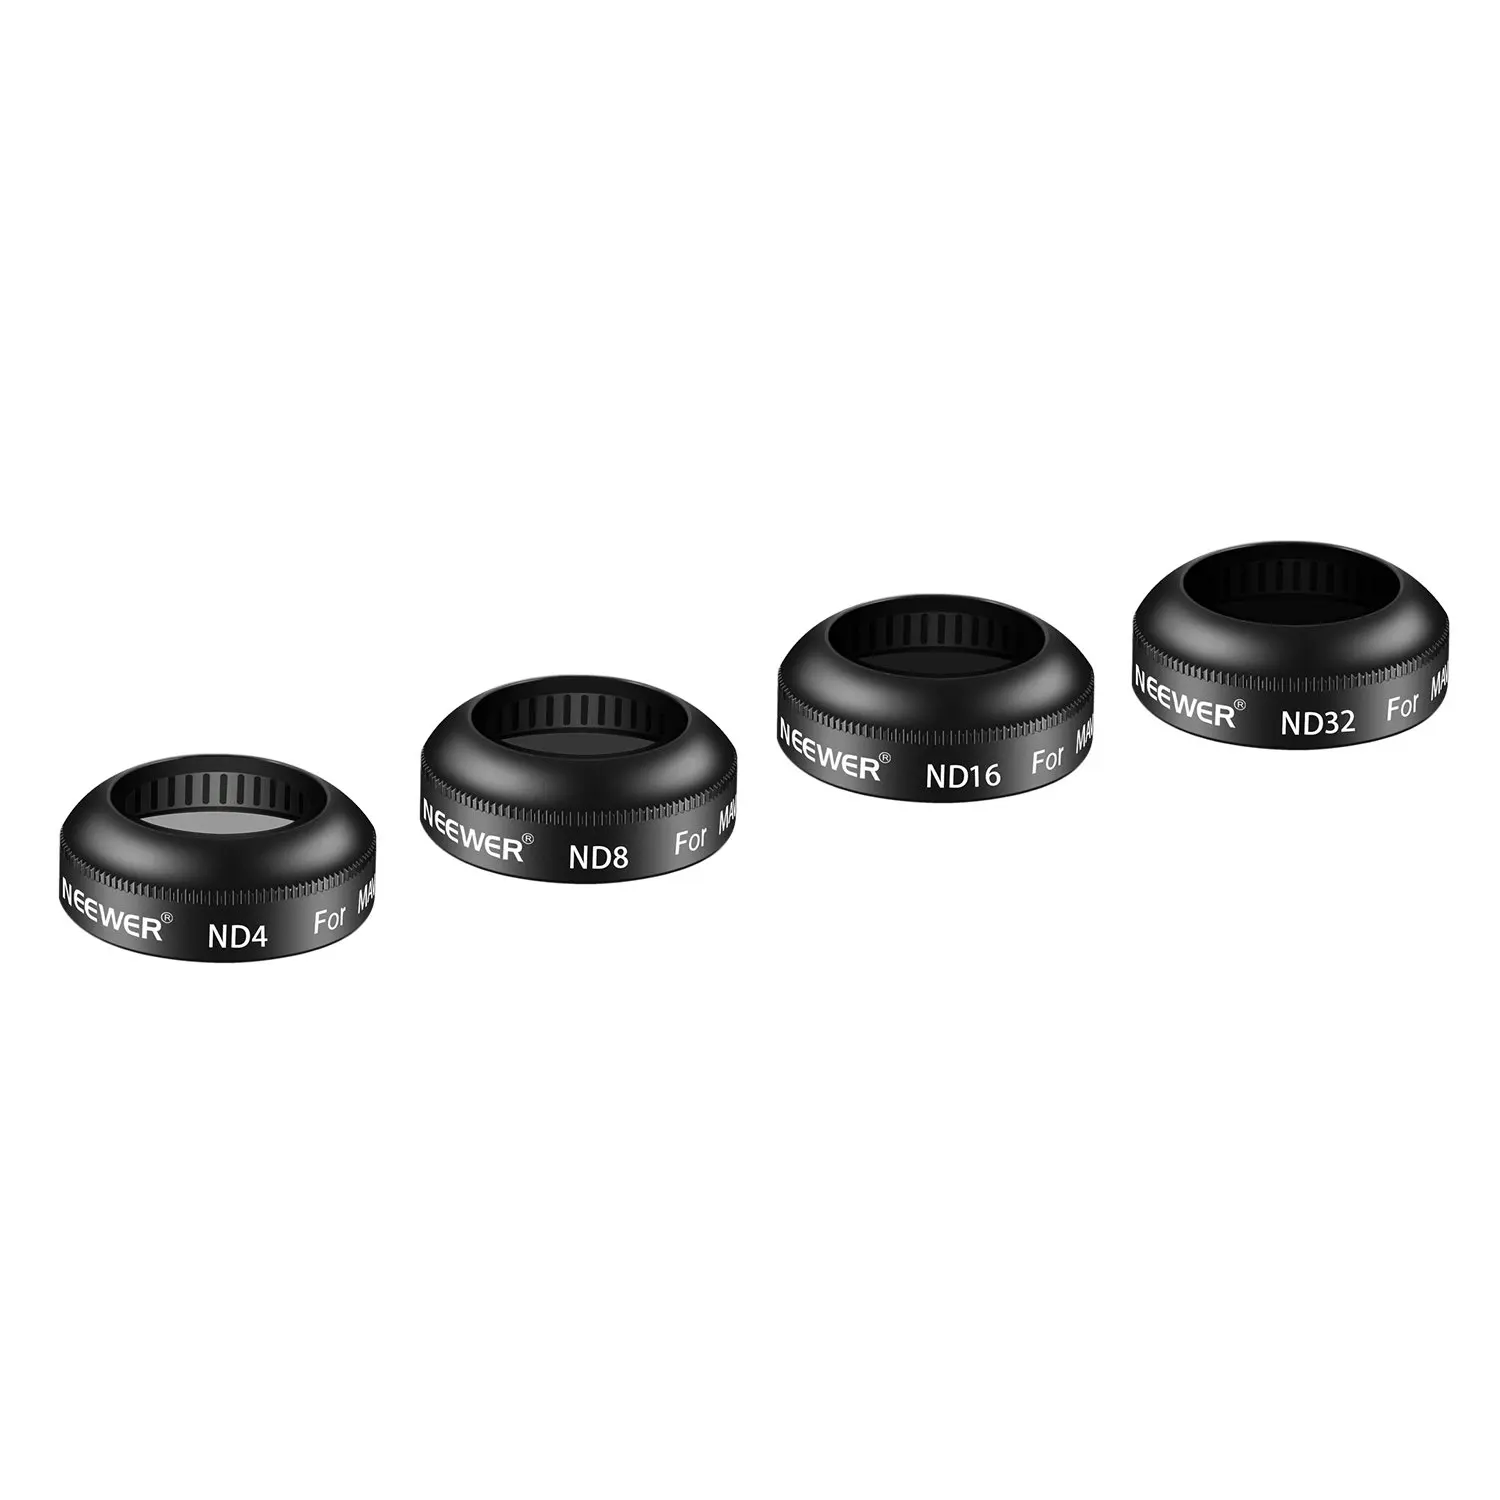 ND16 Includes Multi-coated HD ND4 Black ND32 Filters with Carrying Box Neewer 4 Pieces Drone Neutral Density ND Filter Kit for DJI Mavic and Mavic Pro Quadcopter ND8